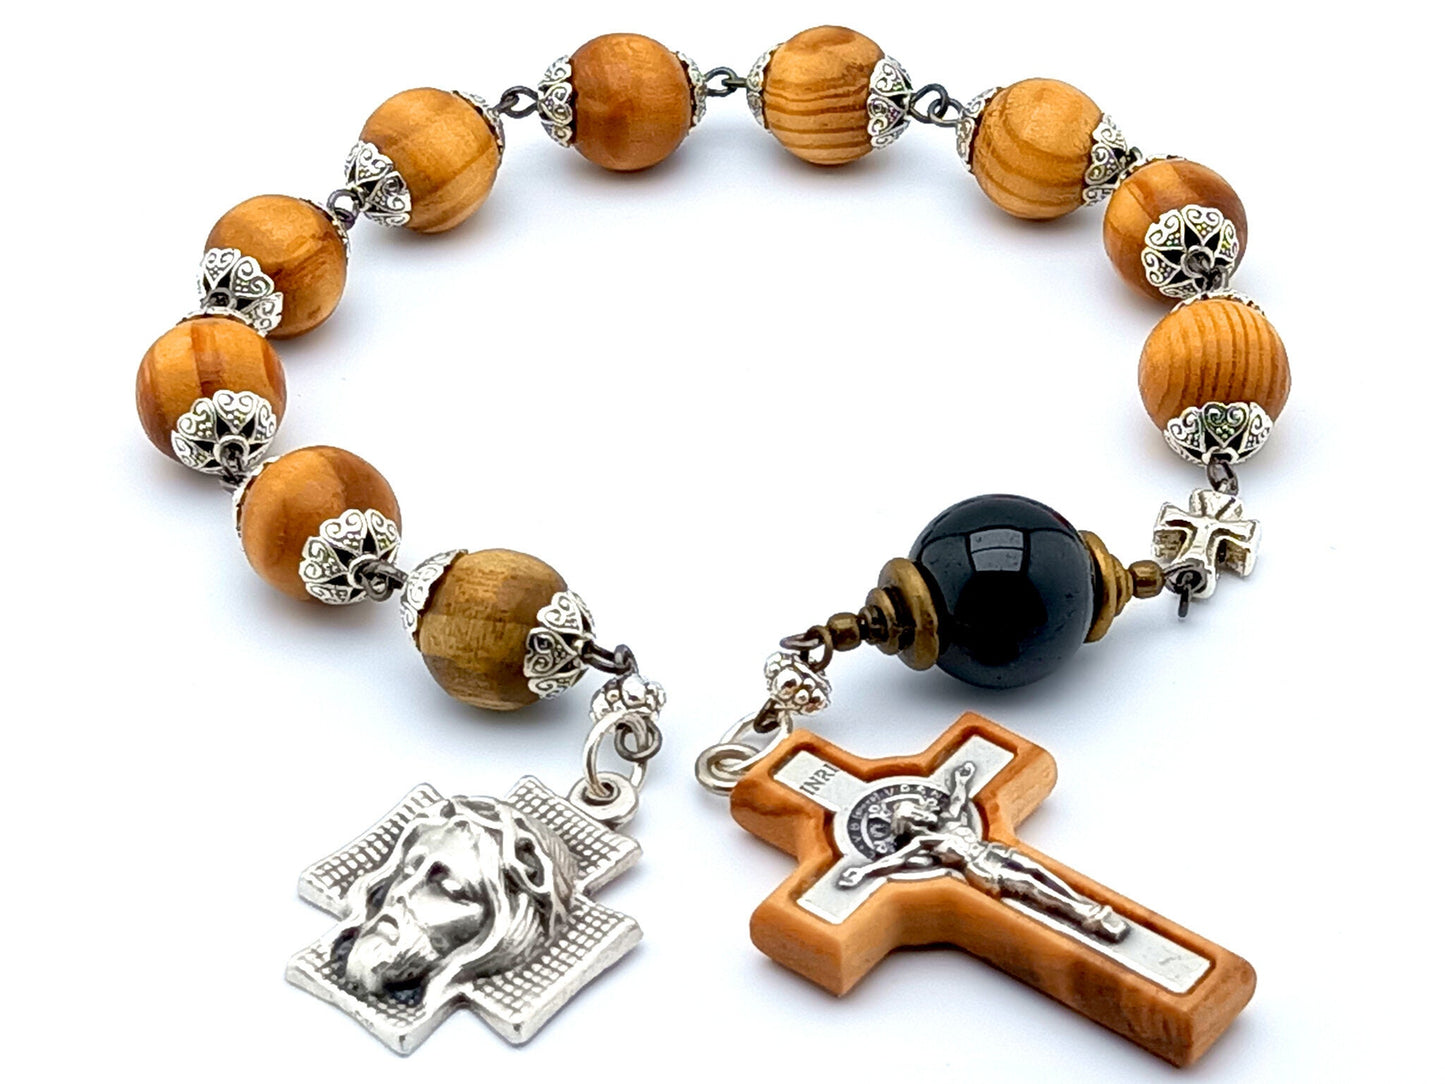 Crown of Thorns unique rosary beads single decade rosary beads with wooden and onyx beads, olive wood and silver crucifix and silver medal.